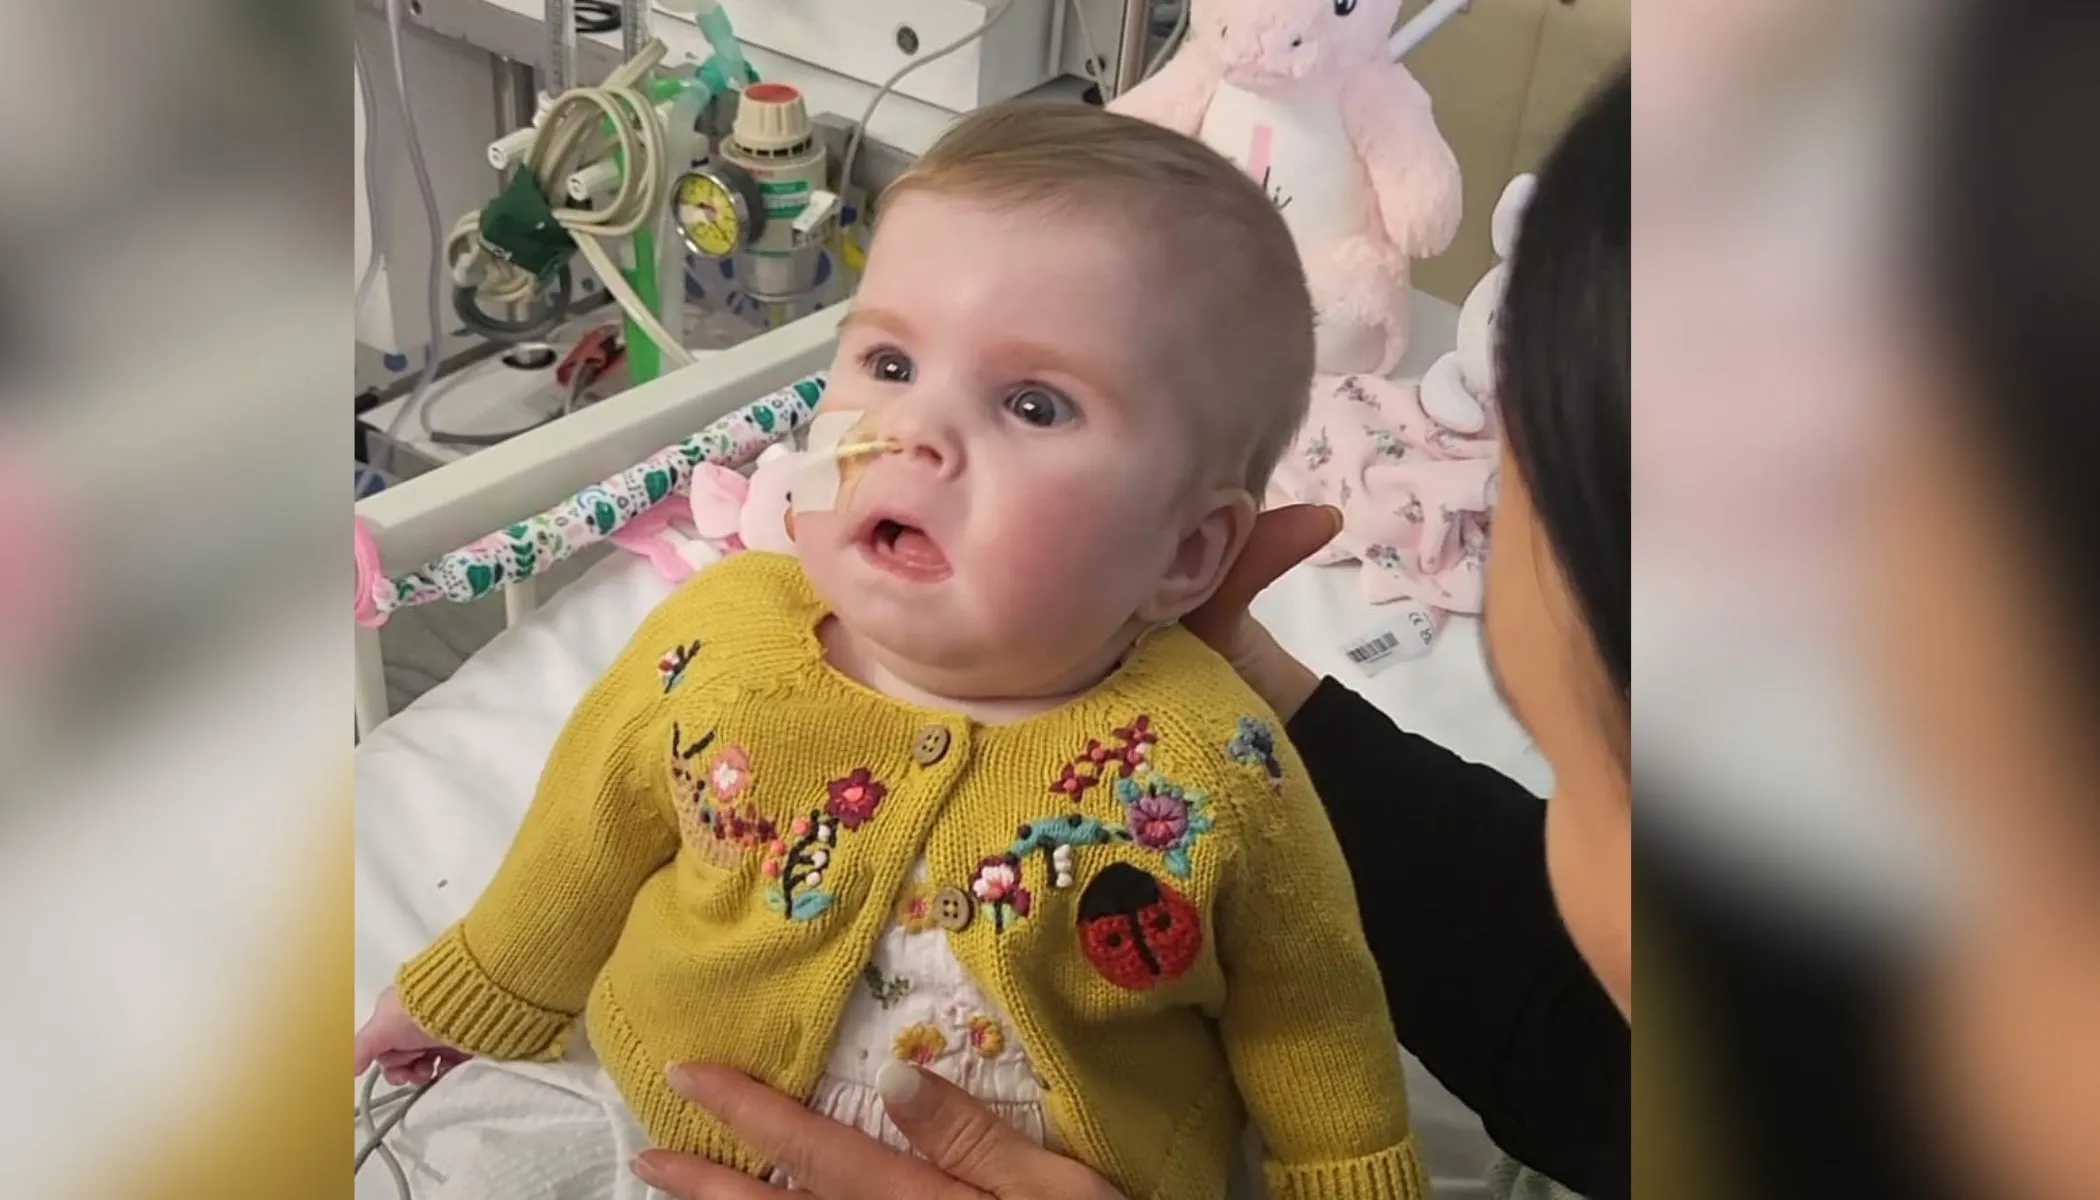 Indi Gregory, born in February and baptized in September, suffers from a rare degenerative mitochondrial disease and has been receiving life-sustaining treatment on a ventilator at the Queen’s Medical Centre in Nottingham, England.?w=200&h=150